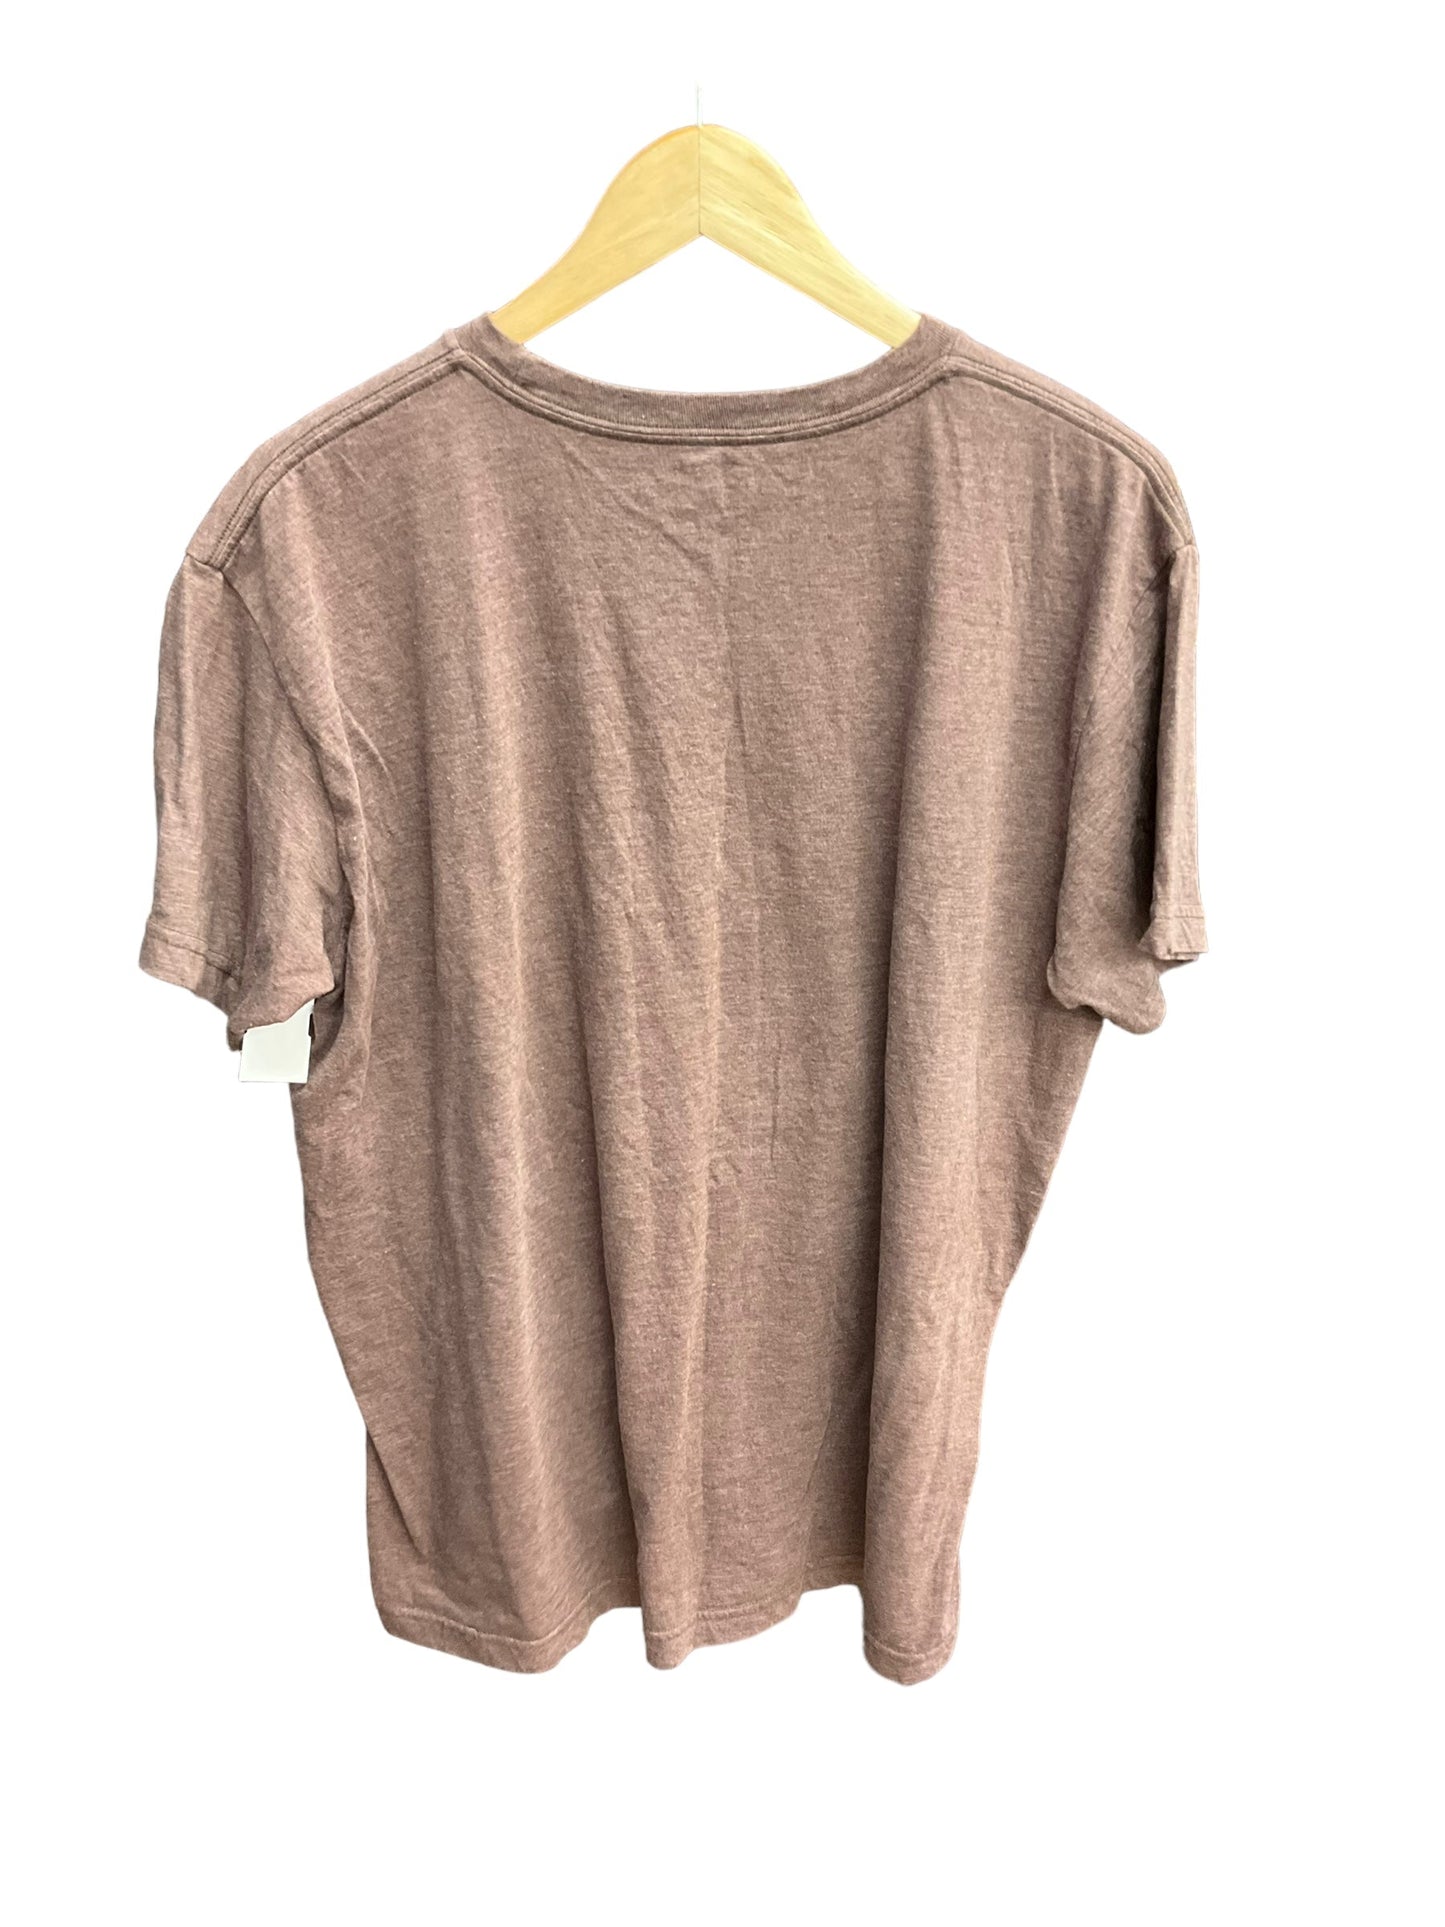 Brown Top Short Sleeve Basic Clothes Mentor, Size Xl